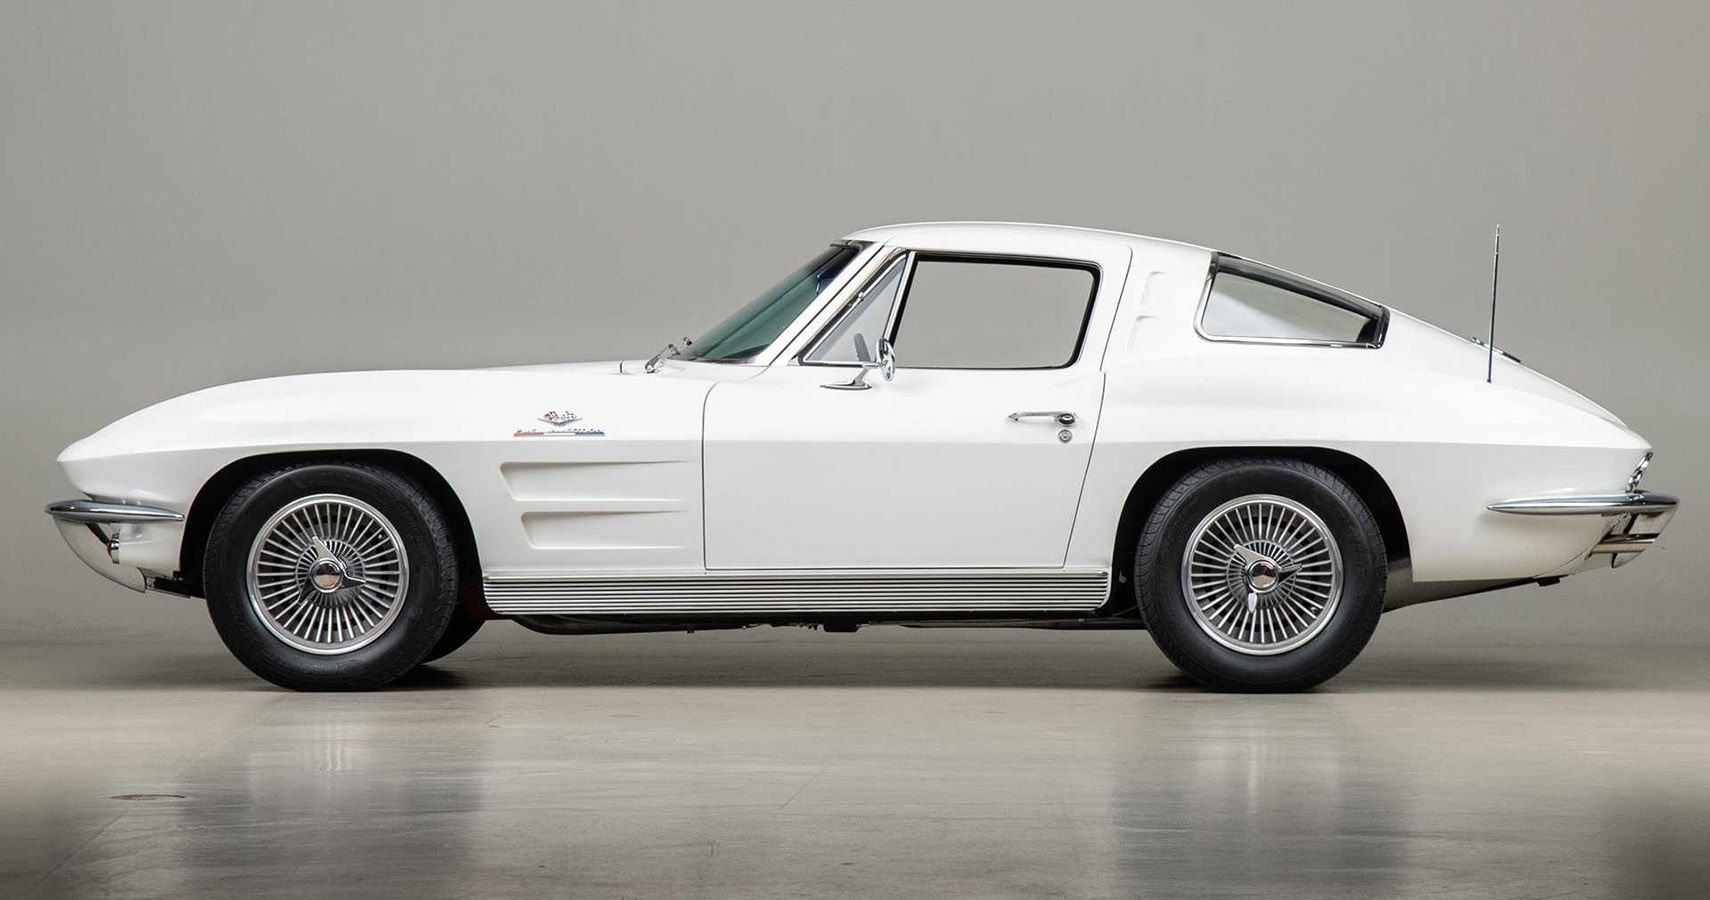 A Mint Condition 1963 Chevrolet Corvette Split Window Can Easily Fetch Three Times That Amount And Even Touch $200,000